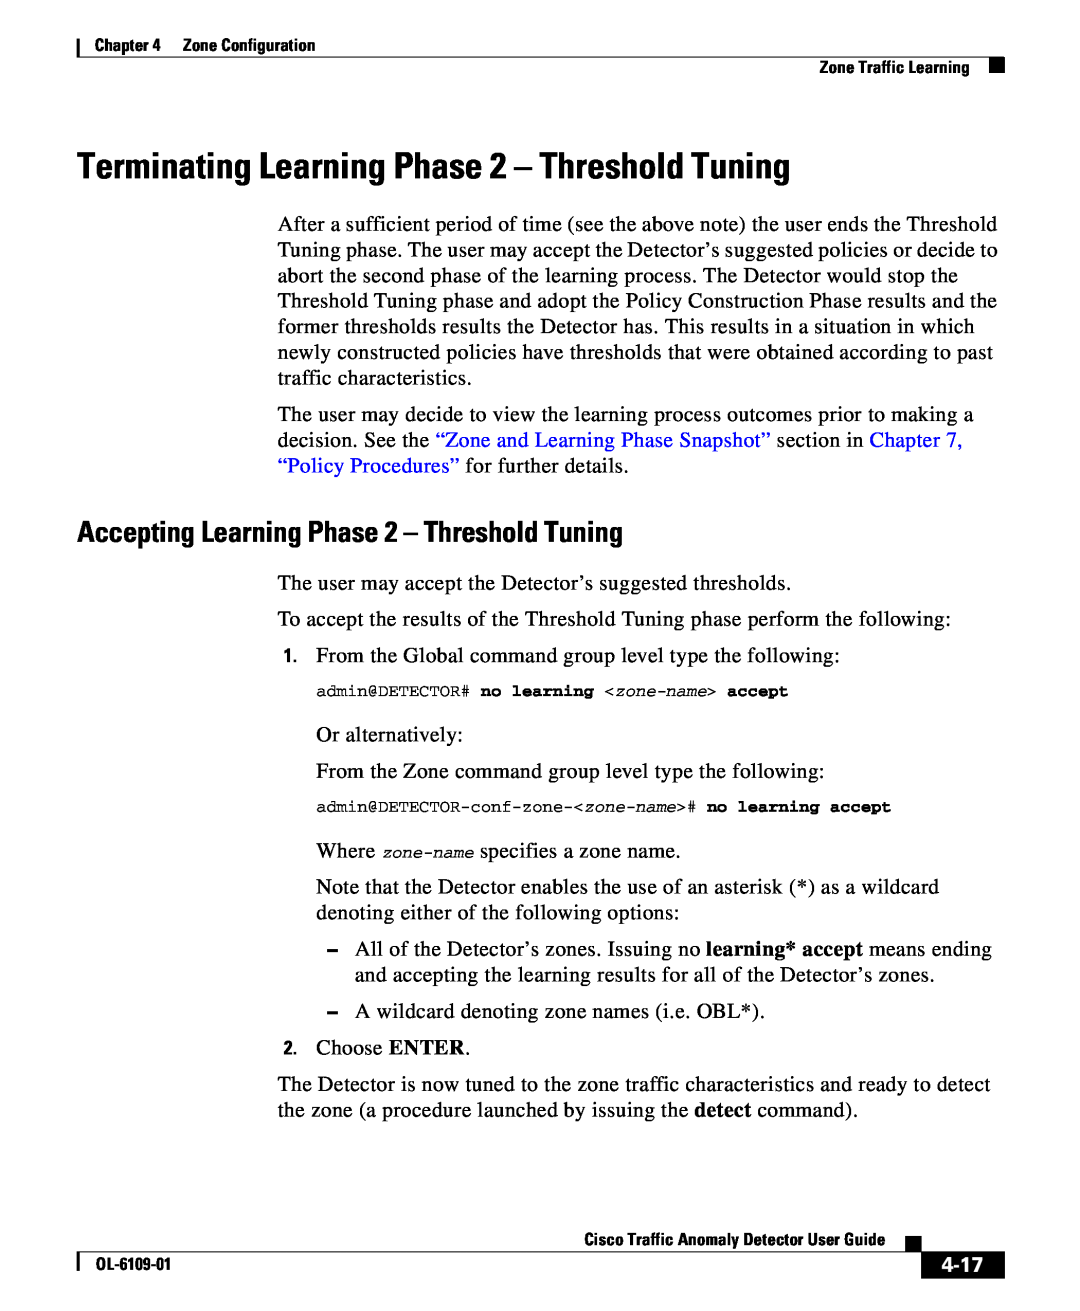 Cisco Systems OL-6109-01 Terminating Learning Phase 2 - Threshold Tuning, Accepting Learning Phase 2 - Threshold Tuning 